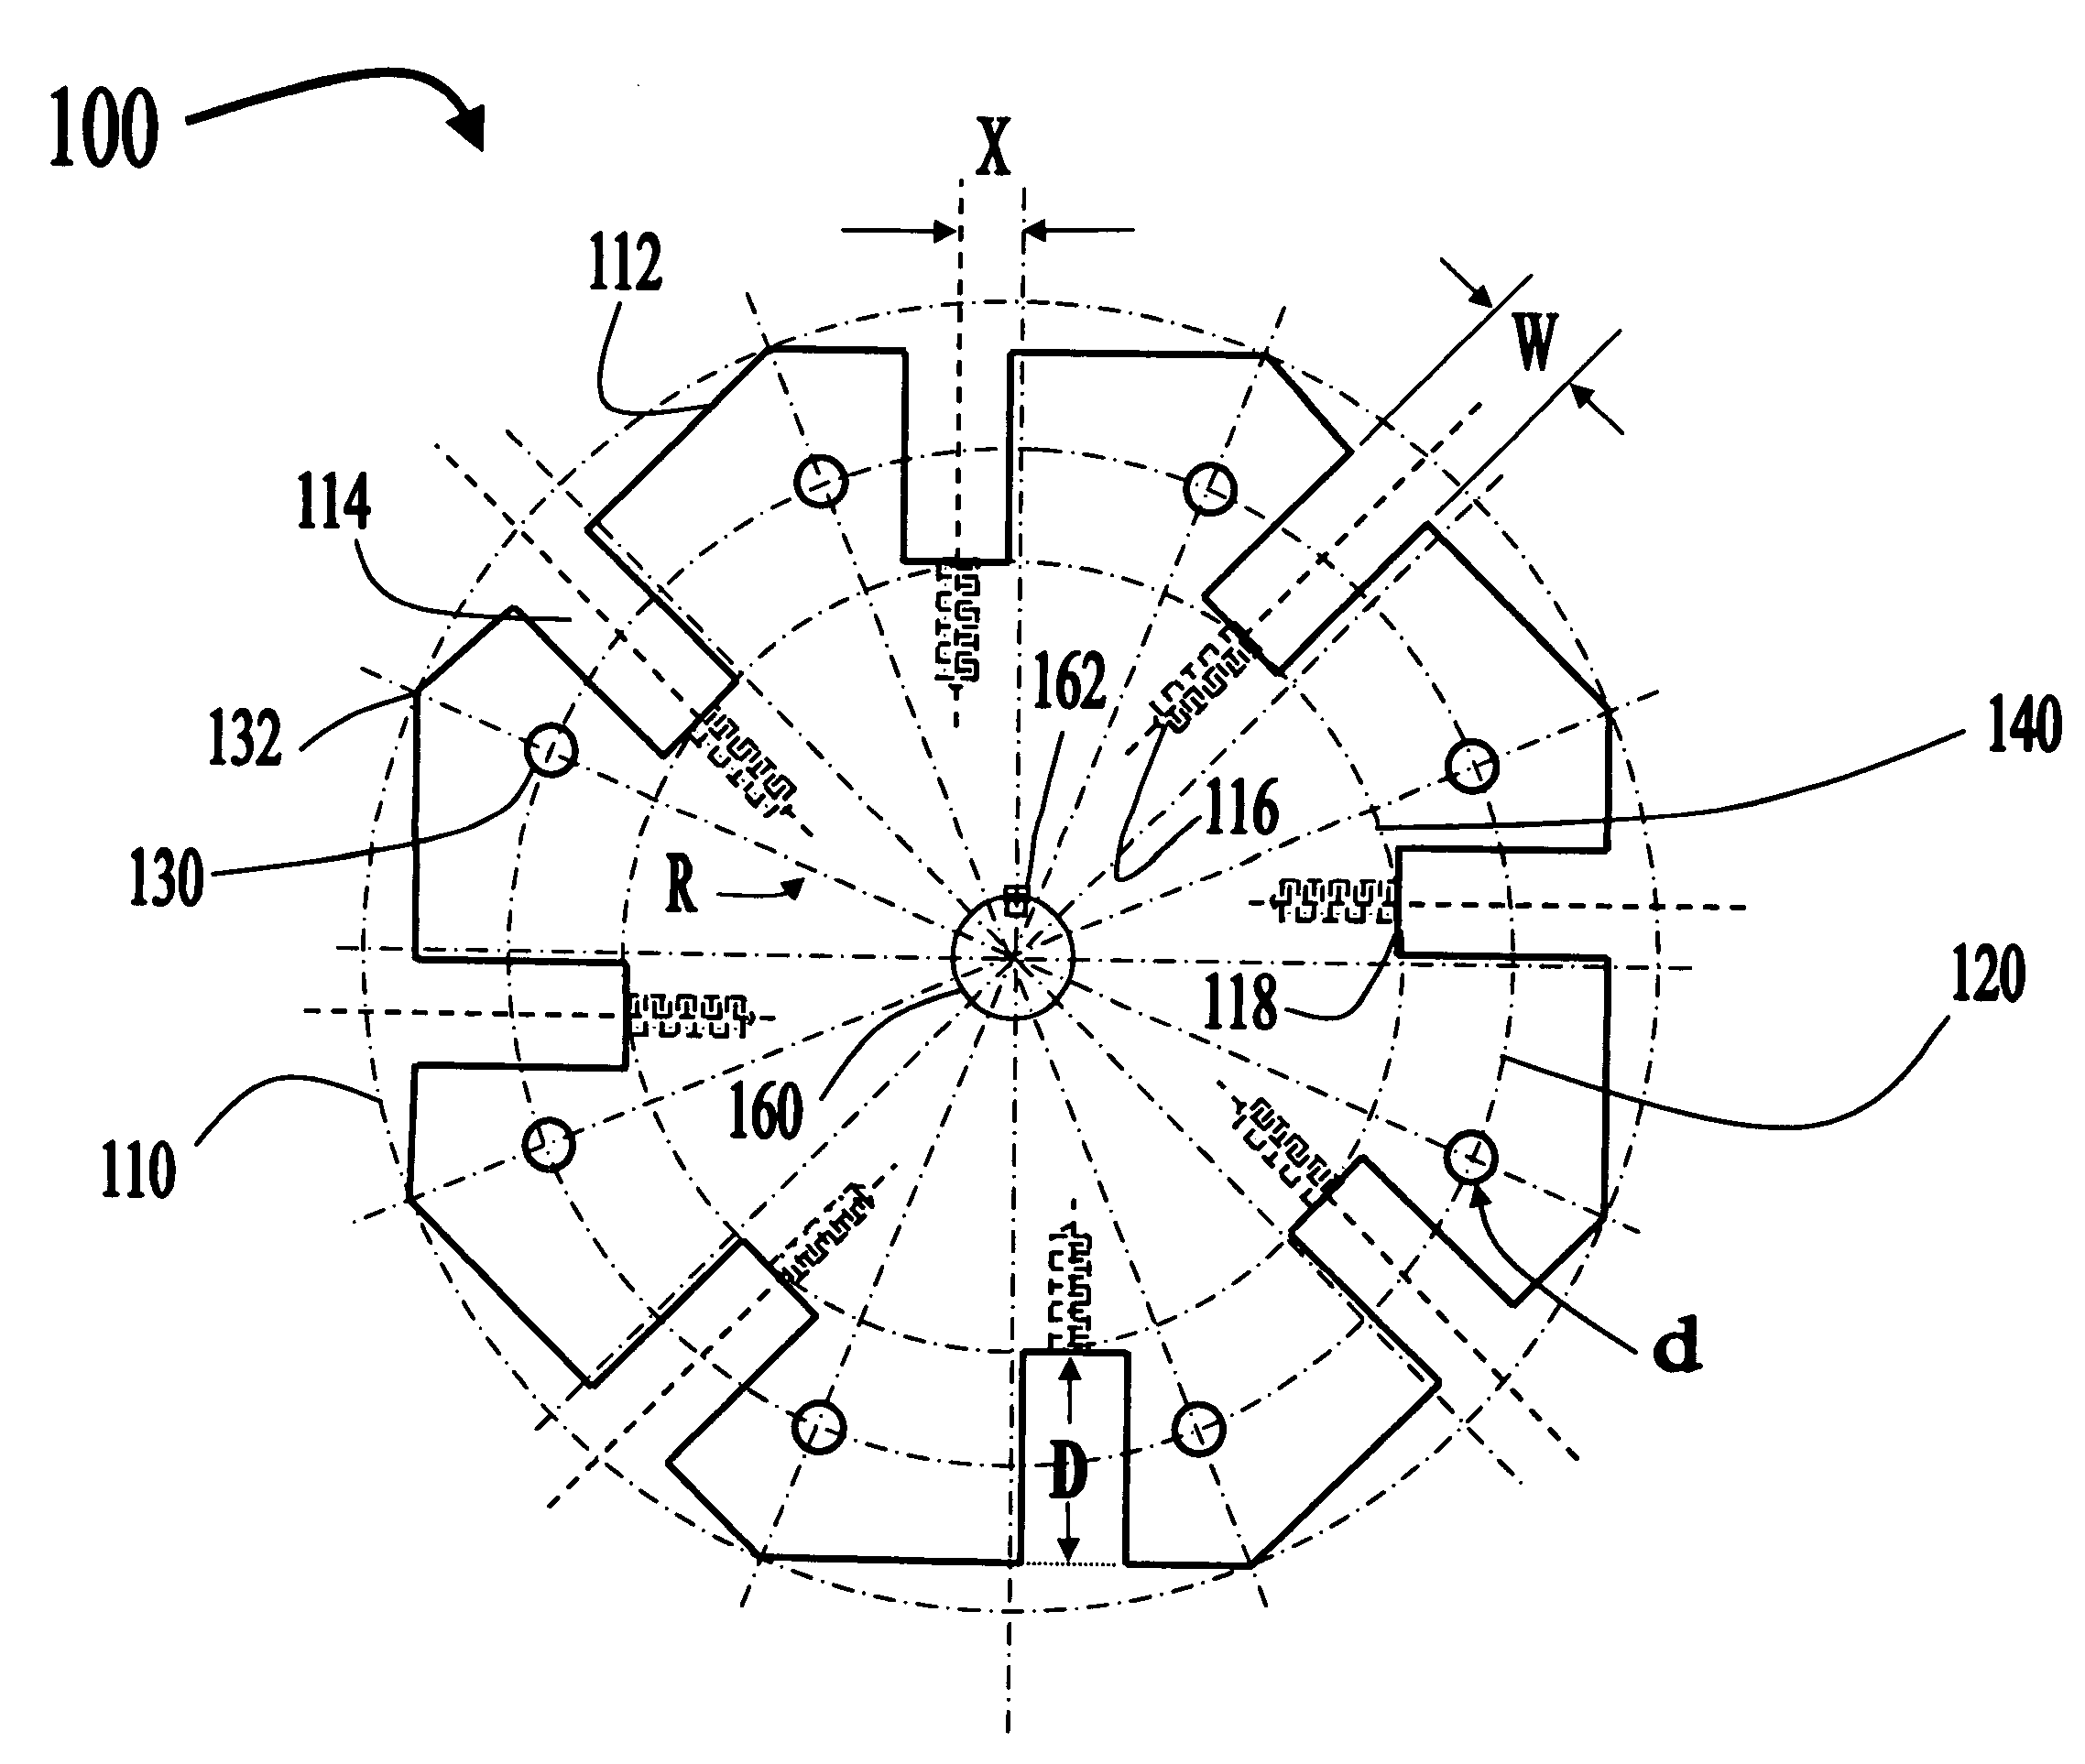 Torque transfer system, method of using the same, method of fabricating the same, and apparatus for monitoring the same